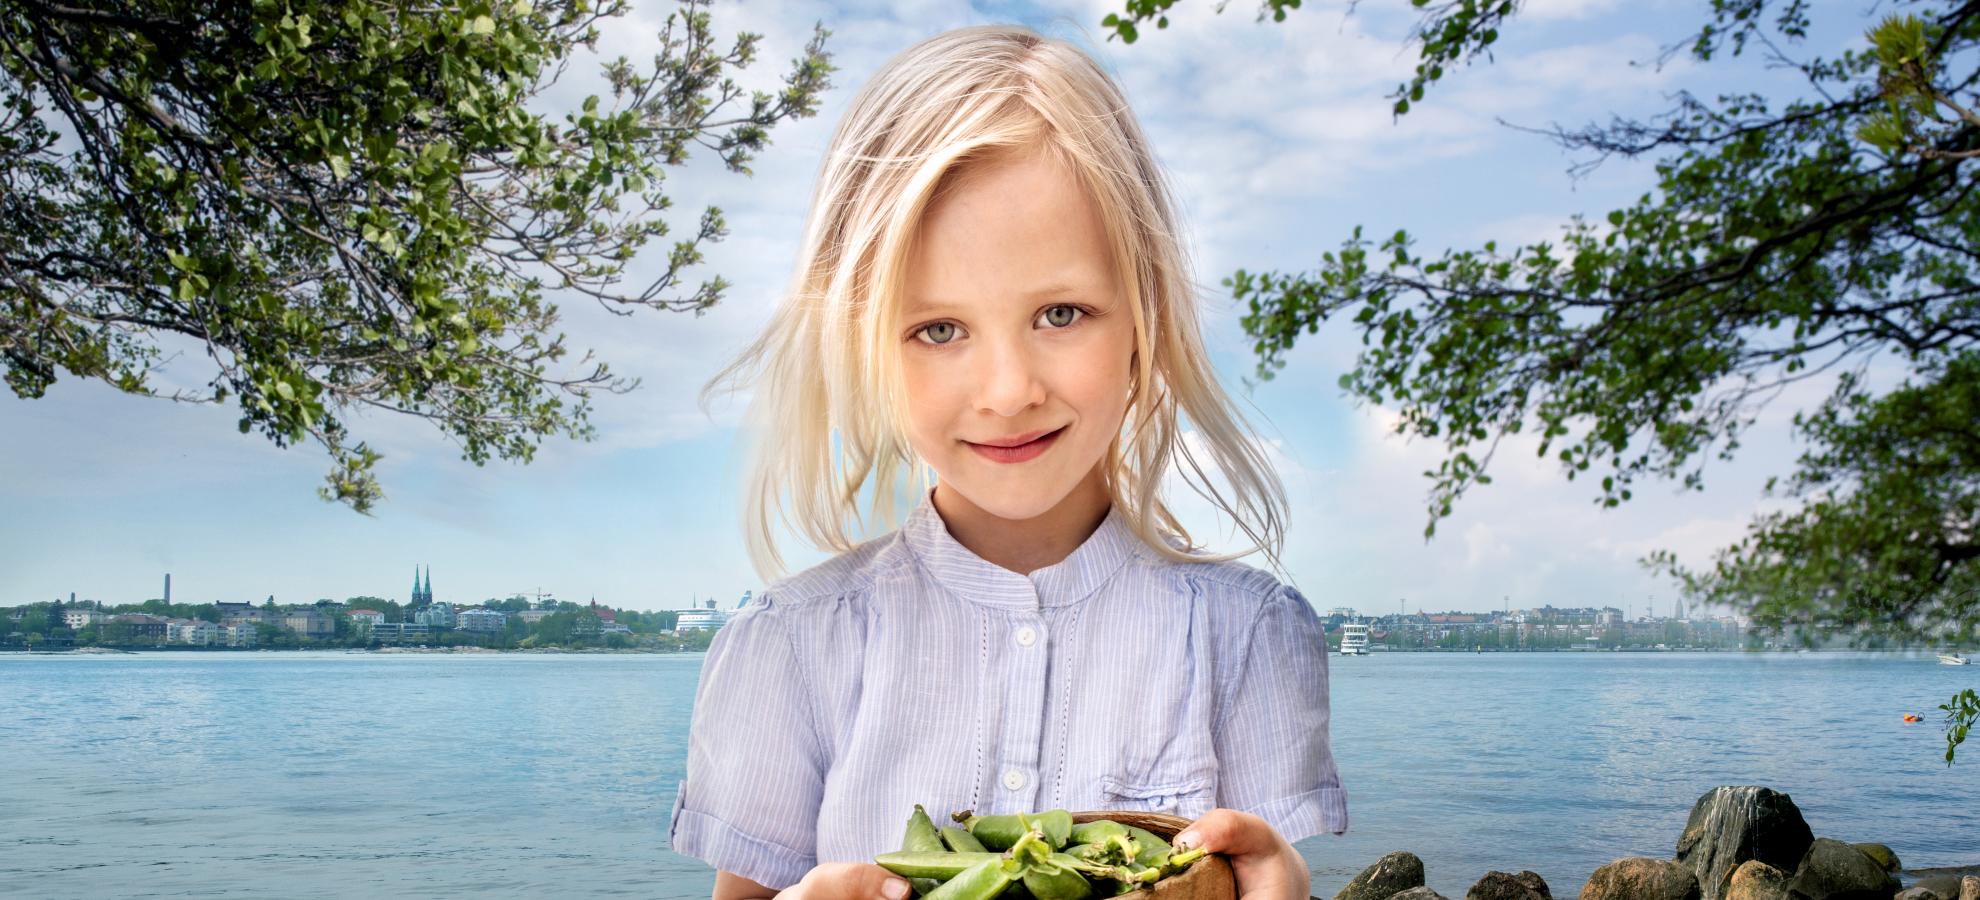 Girl with a bowl of peas on Lonna island